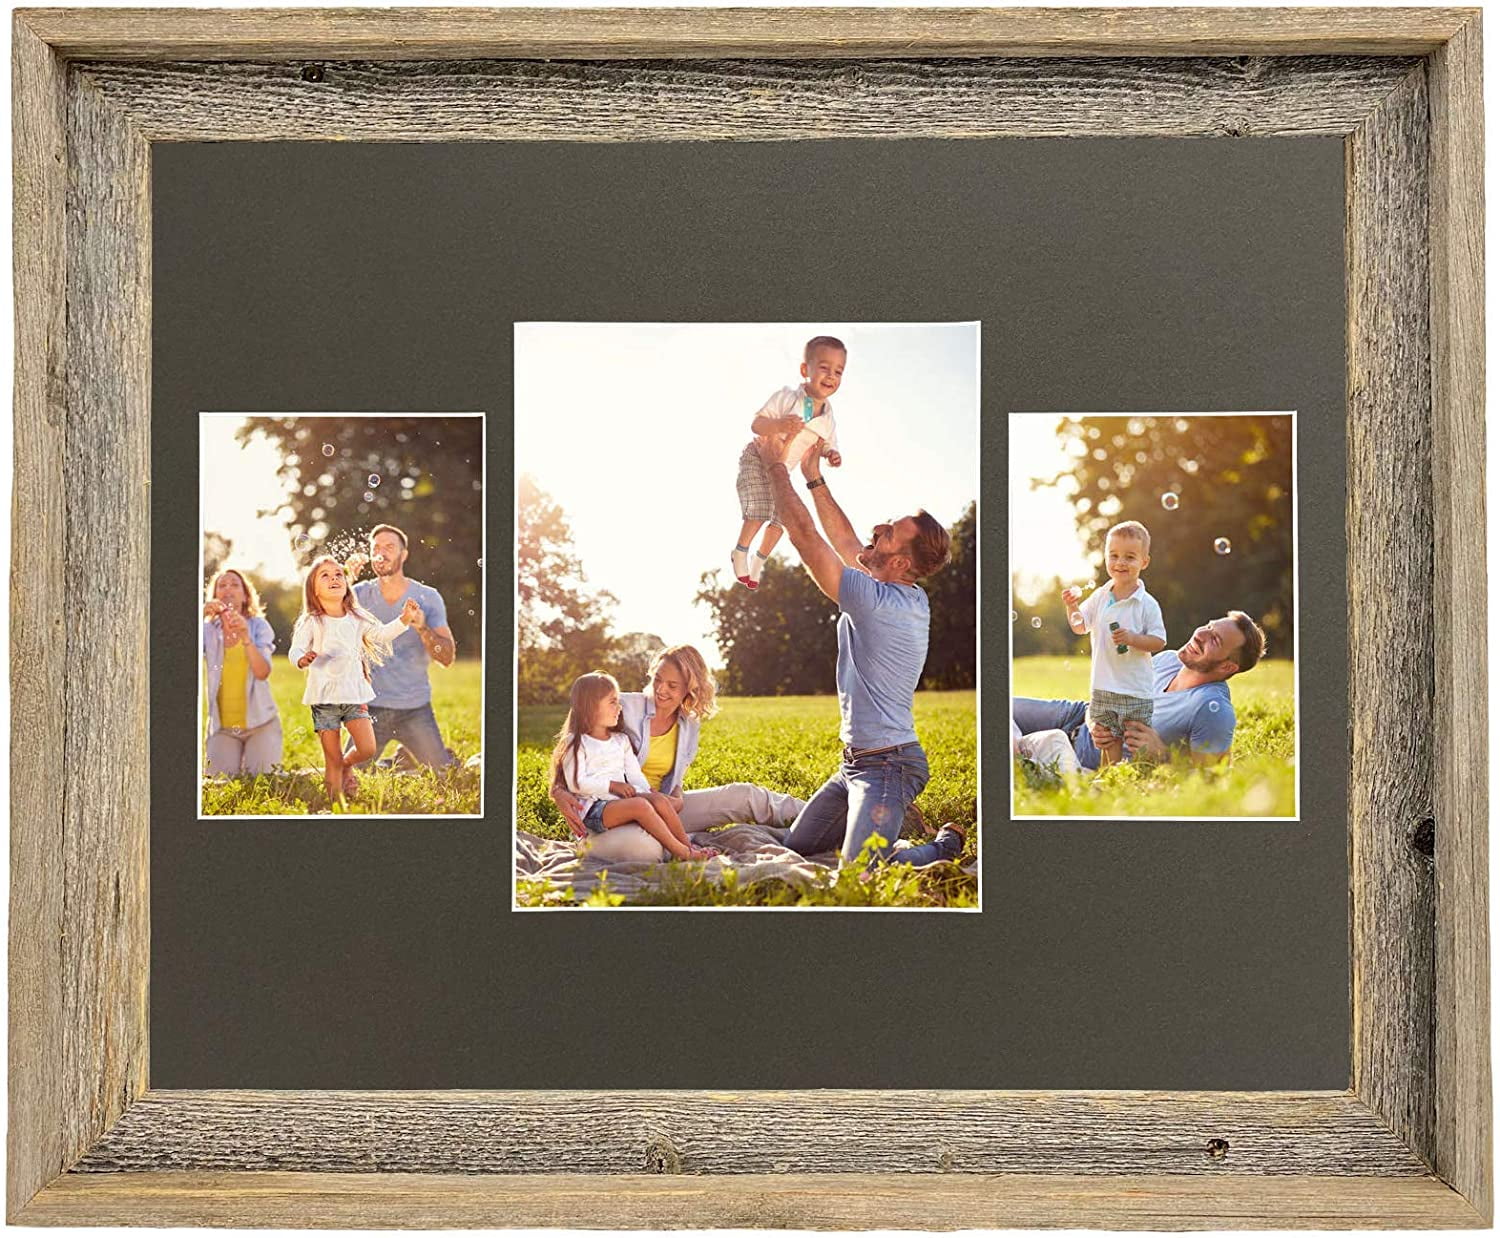 BarnwoodUSA, Farmhouse Style Rustic 16x20 Collage Picture Frame, 3 -  Opening Display with Glass, Fits (1) 8x10 (2) 5x7 Photographs, 100%  Reclaimed Wood